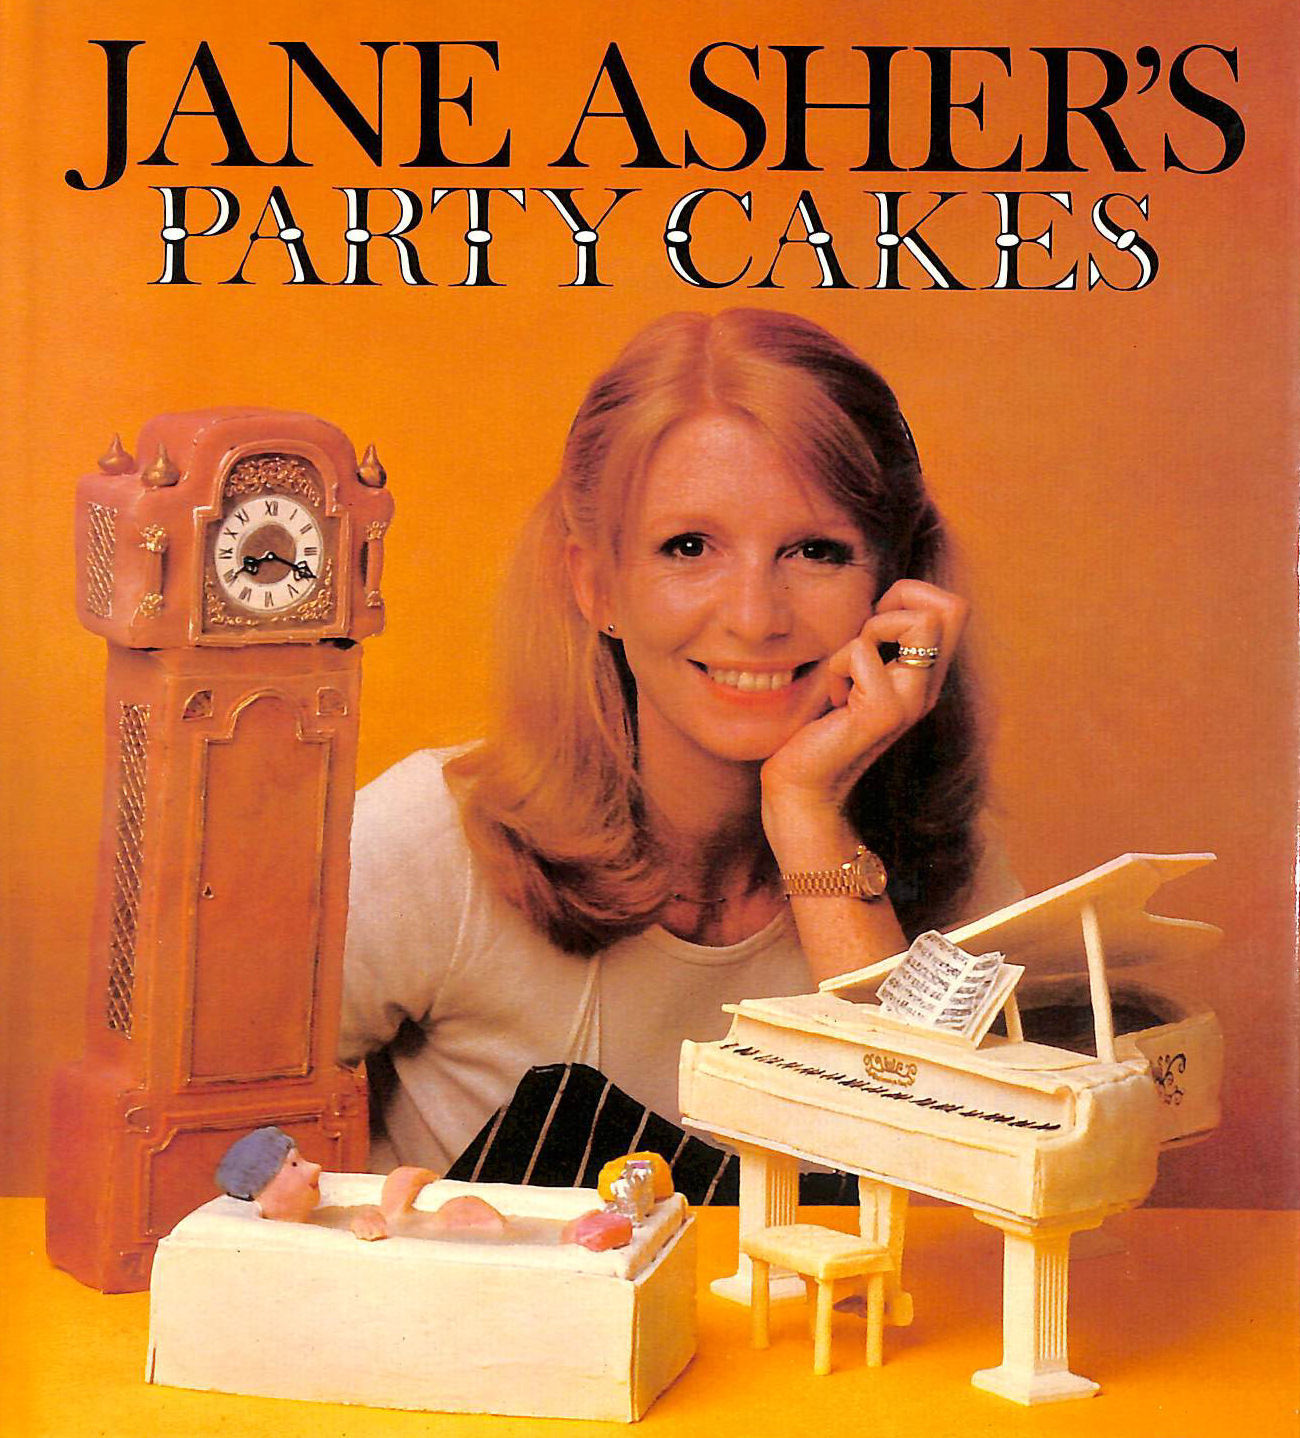 JANE ASHER - Jane Asher's Party Cakes